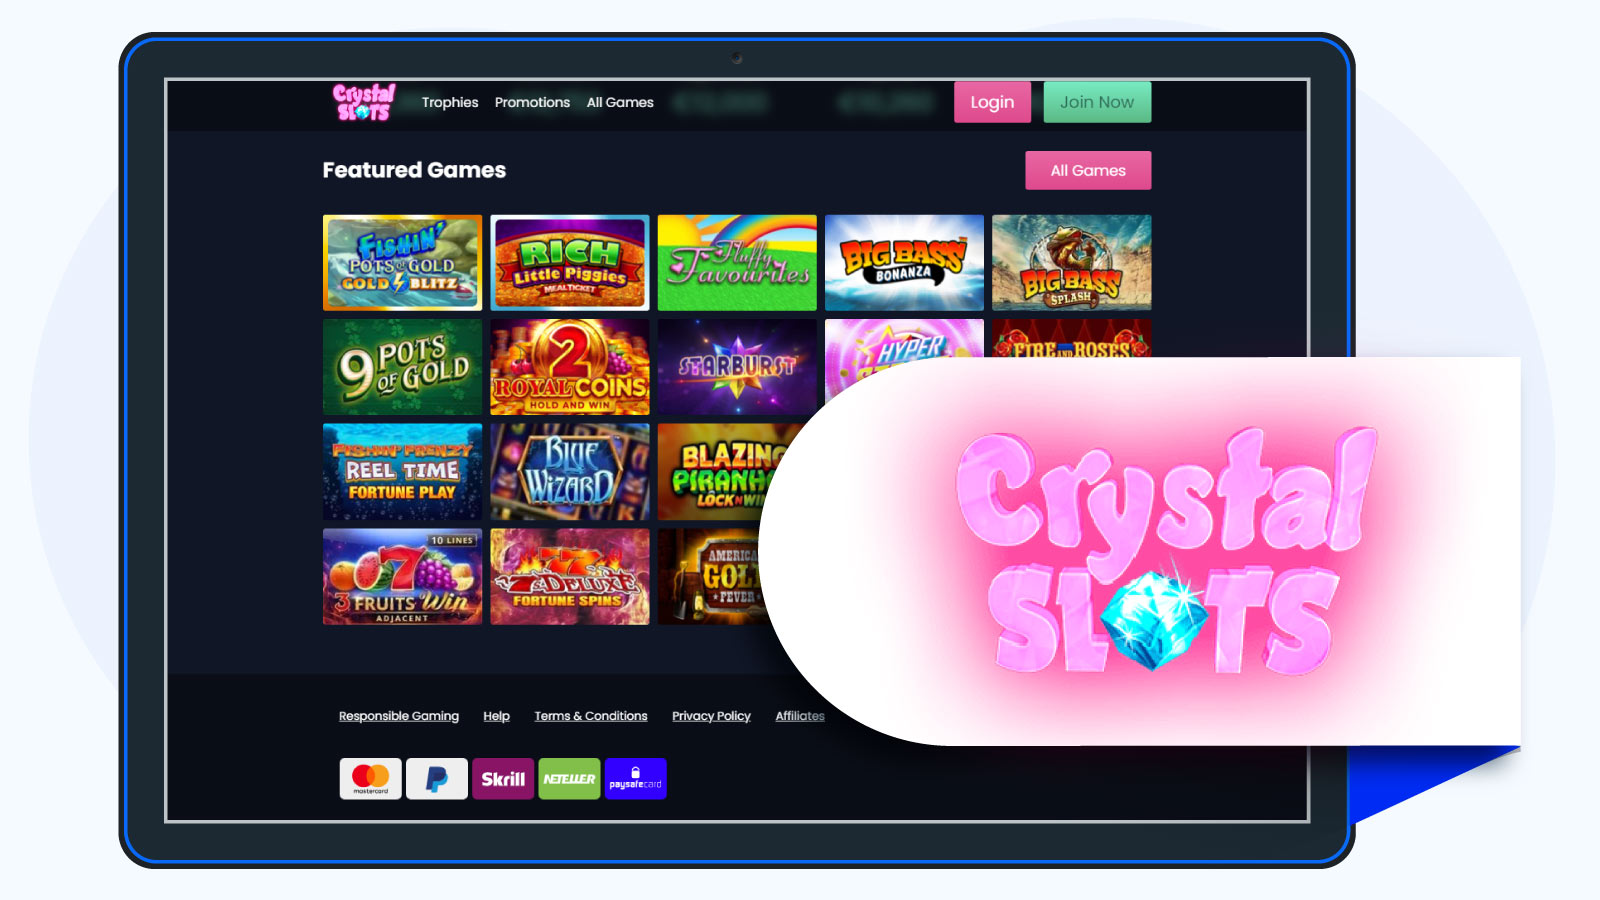 Crystal Slots Casino – our runner-up casino